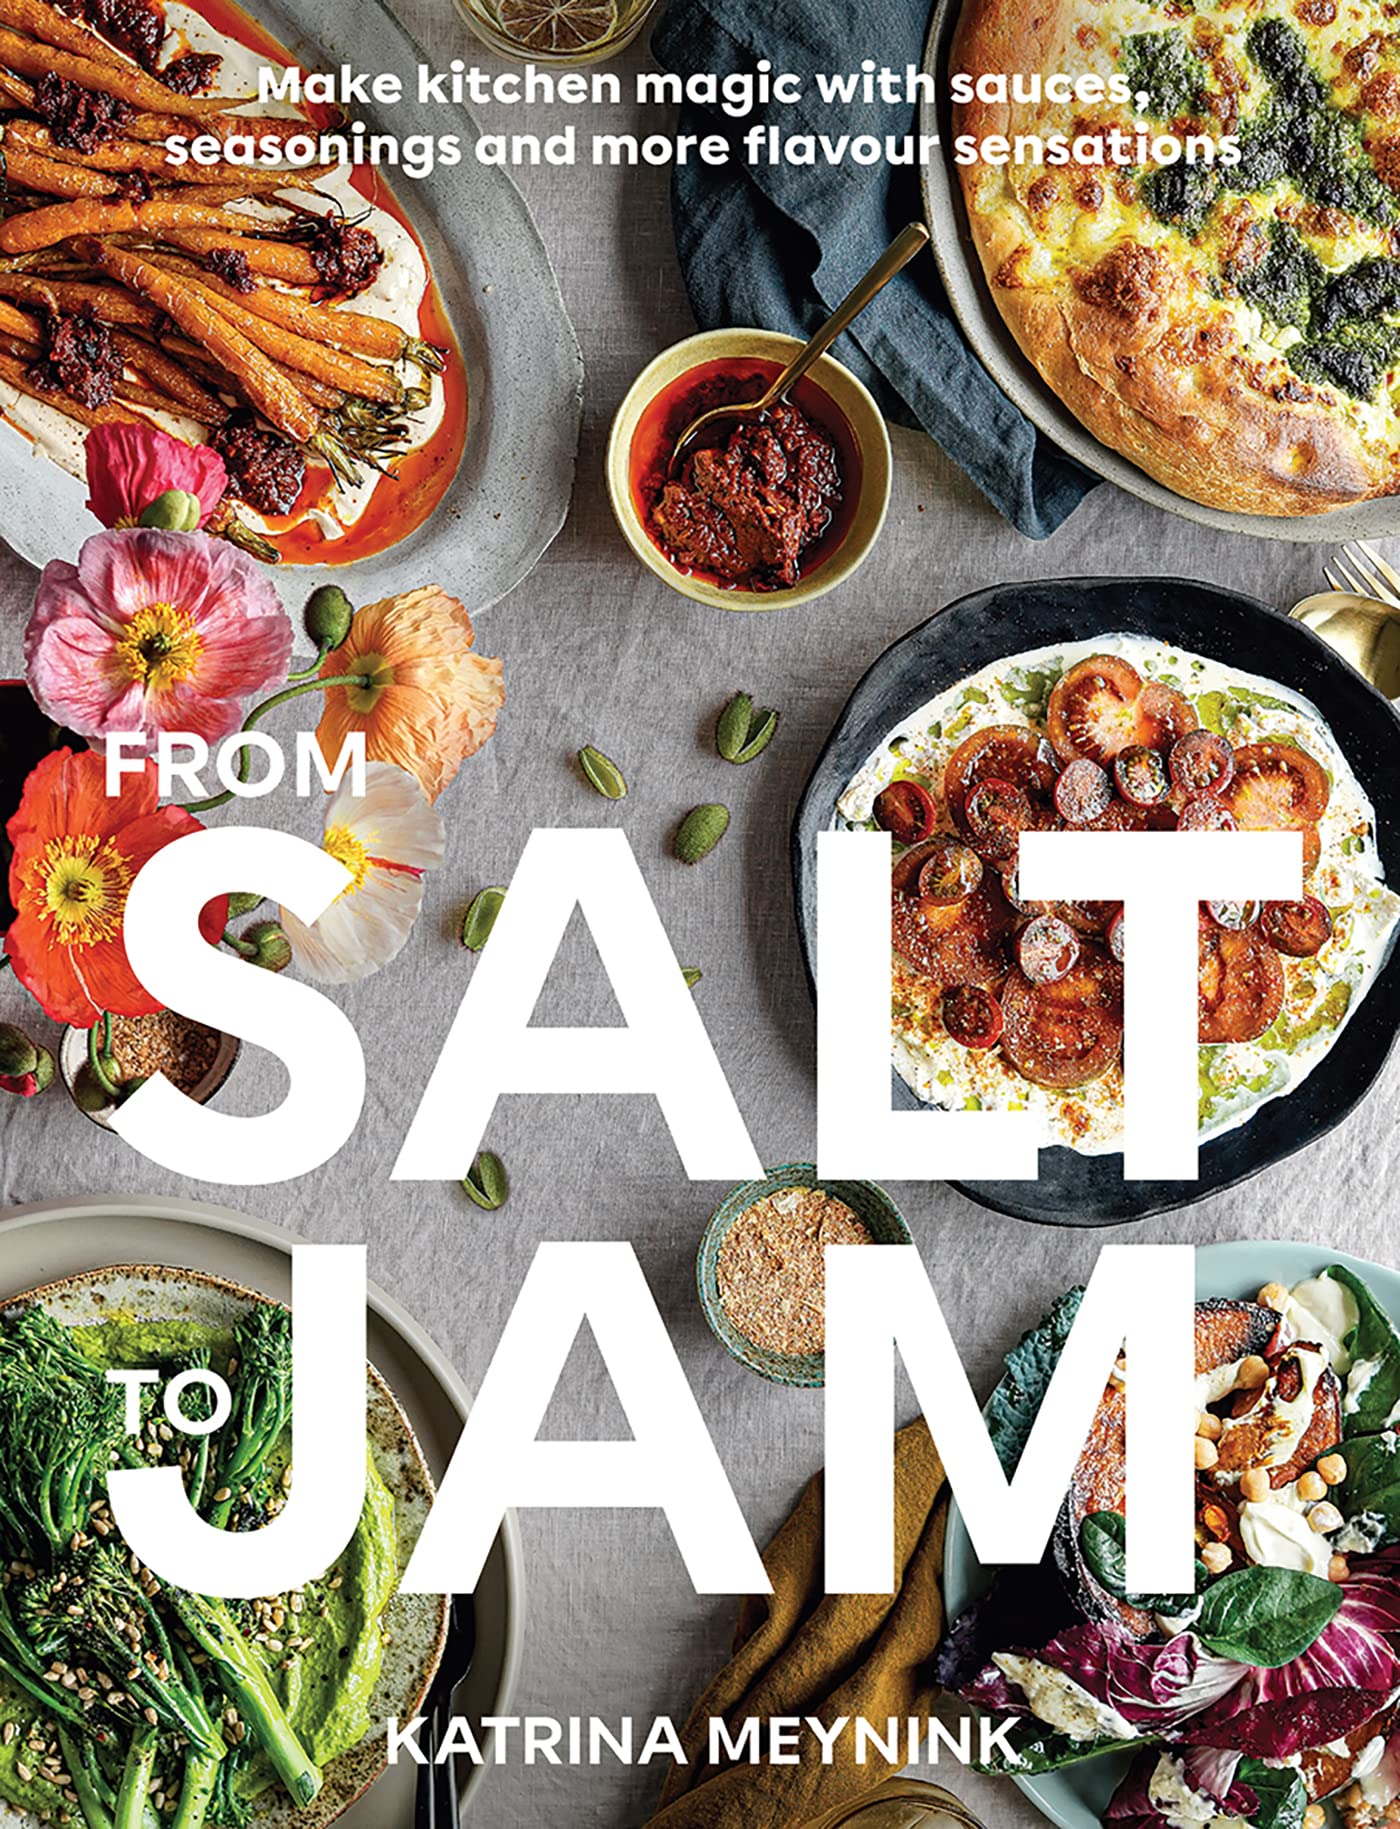 From Salt to Jam: Make Kitchen Magic With Sauces, Seasonings And More Flavour Sensations (Katrina Meynink)